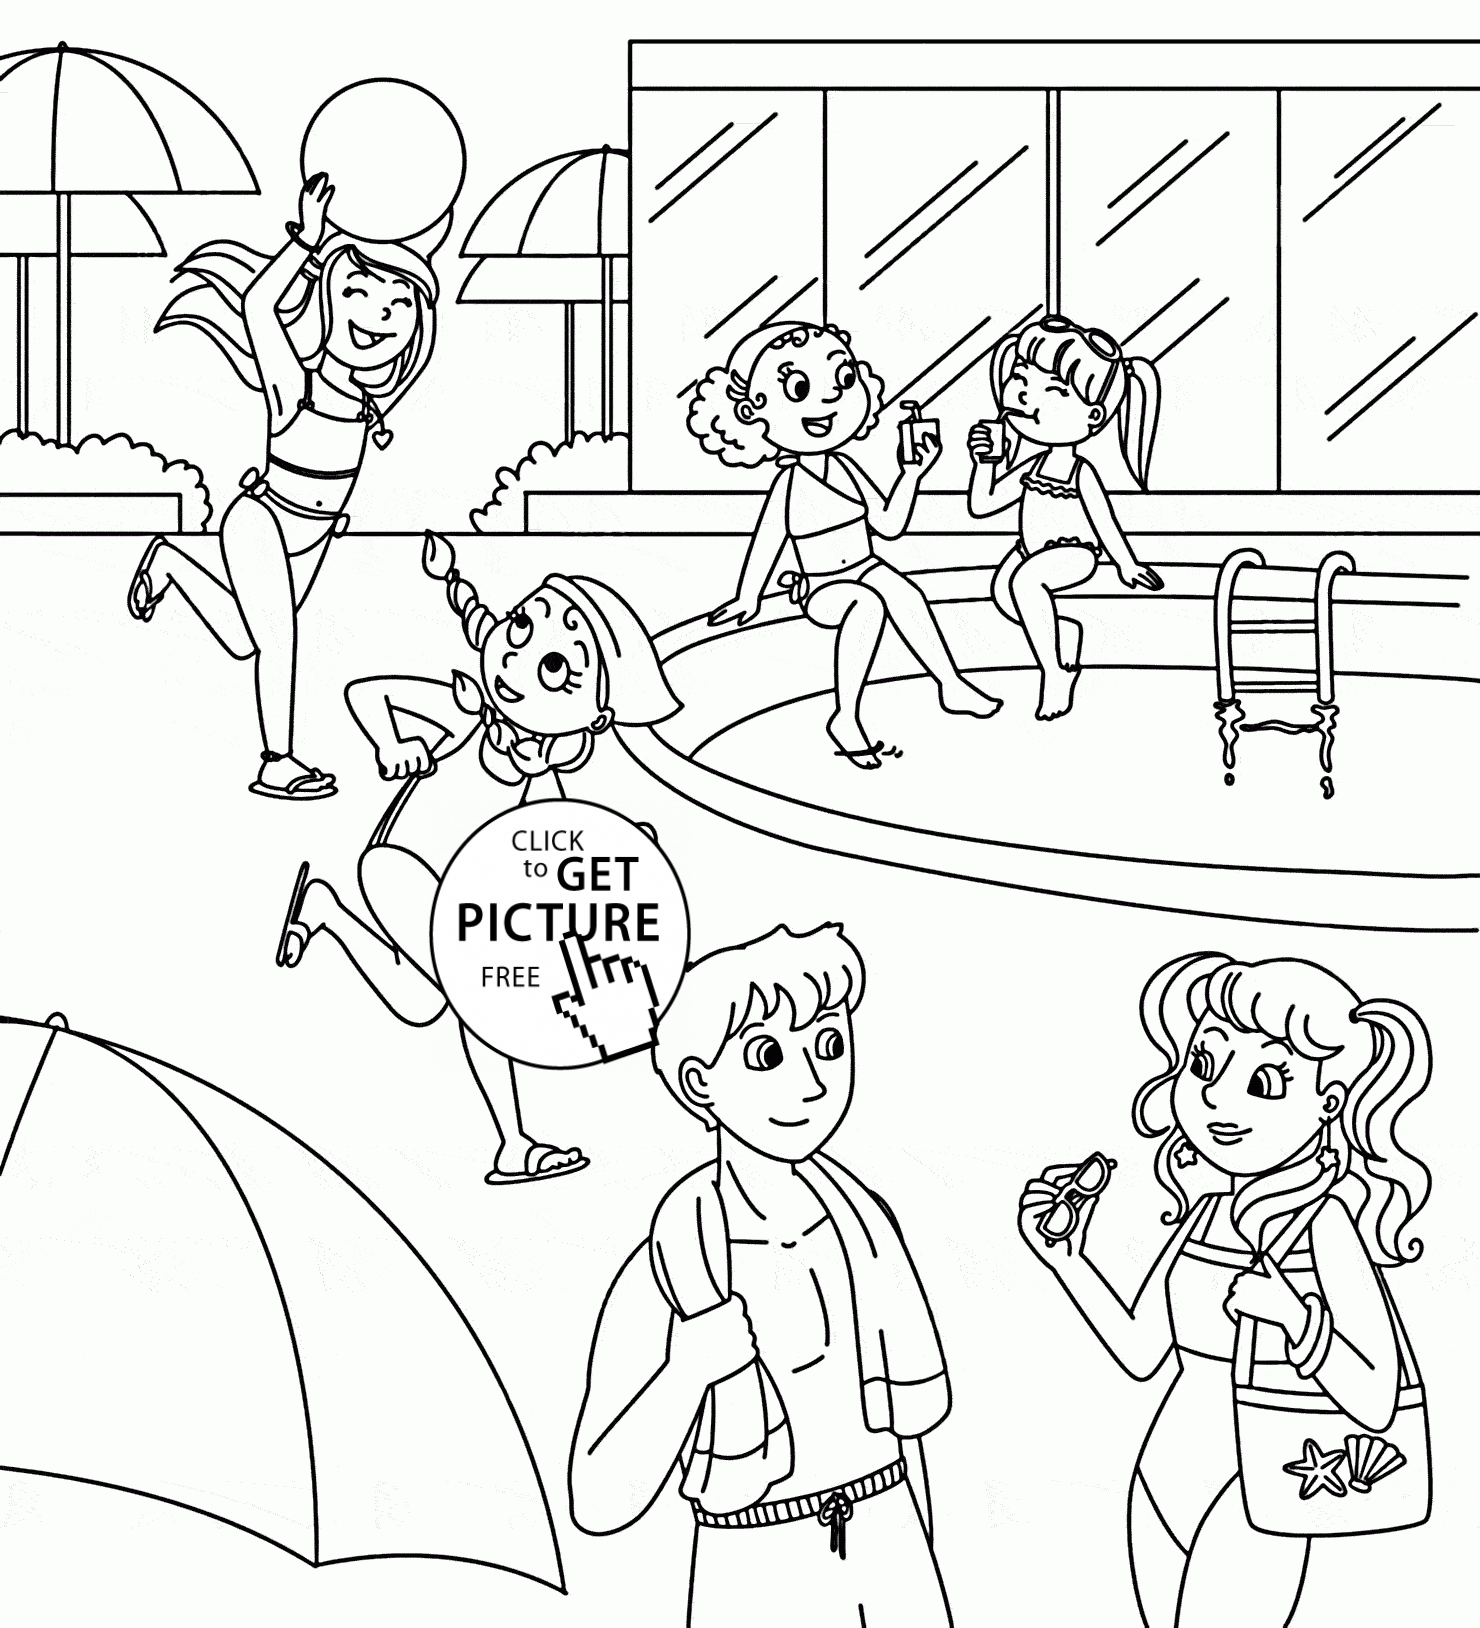 Children Teens in the Swimming Pool coloring page for kids ...